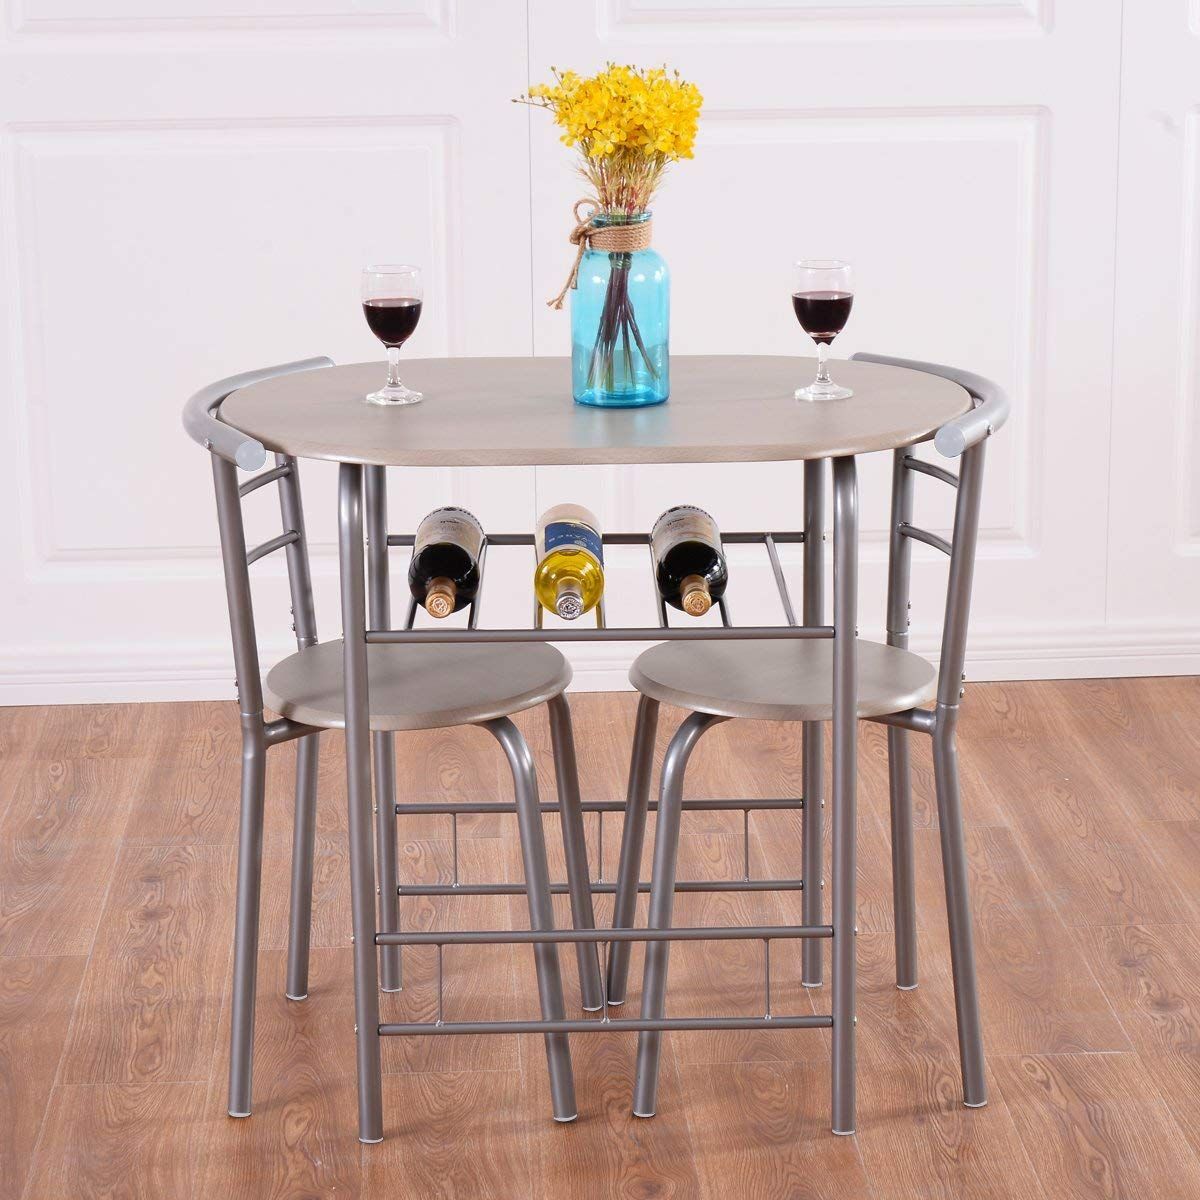 Giantex 3 Piece Dining Set Table 2 Chairs Bistro Pub Home Kitchen Within 3 Piece Bistro Dining Sets (View 2 of 15)